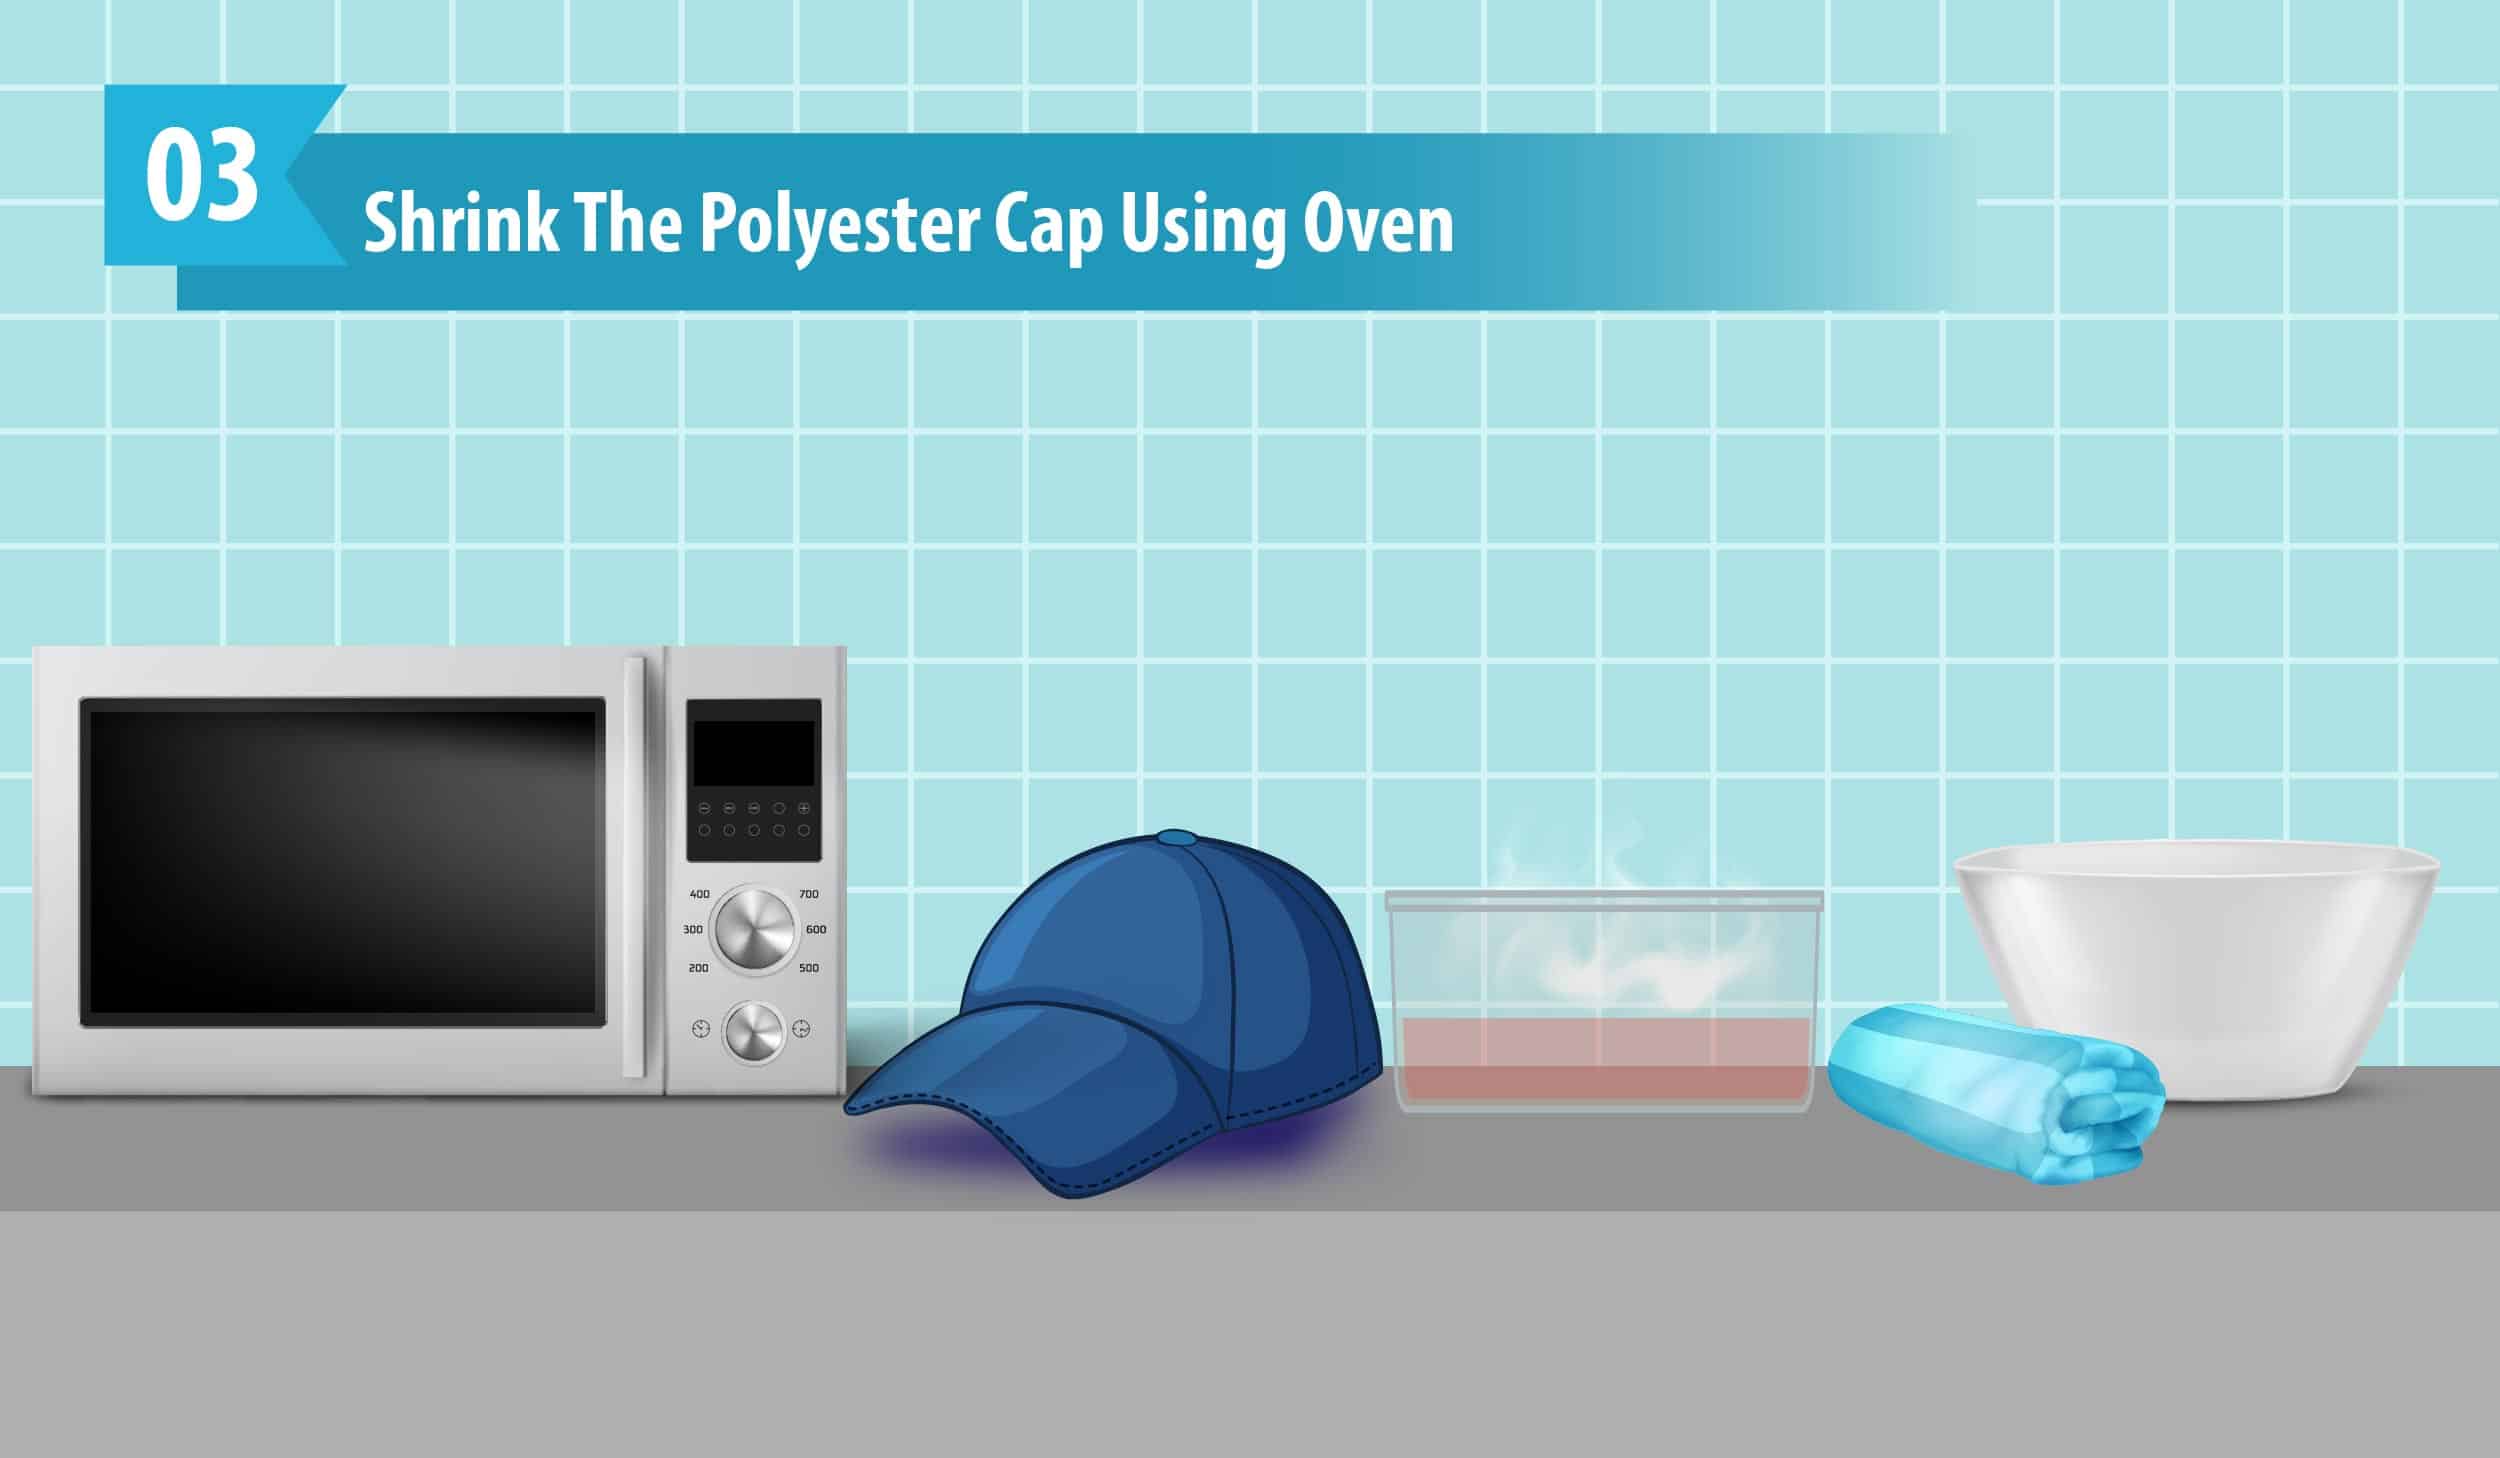 Shrink The Polyester Cap Using Oven